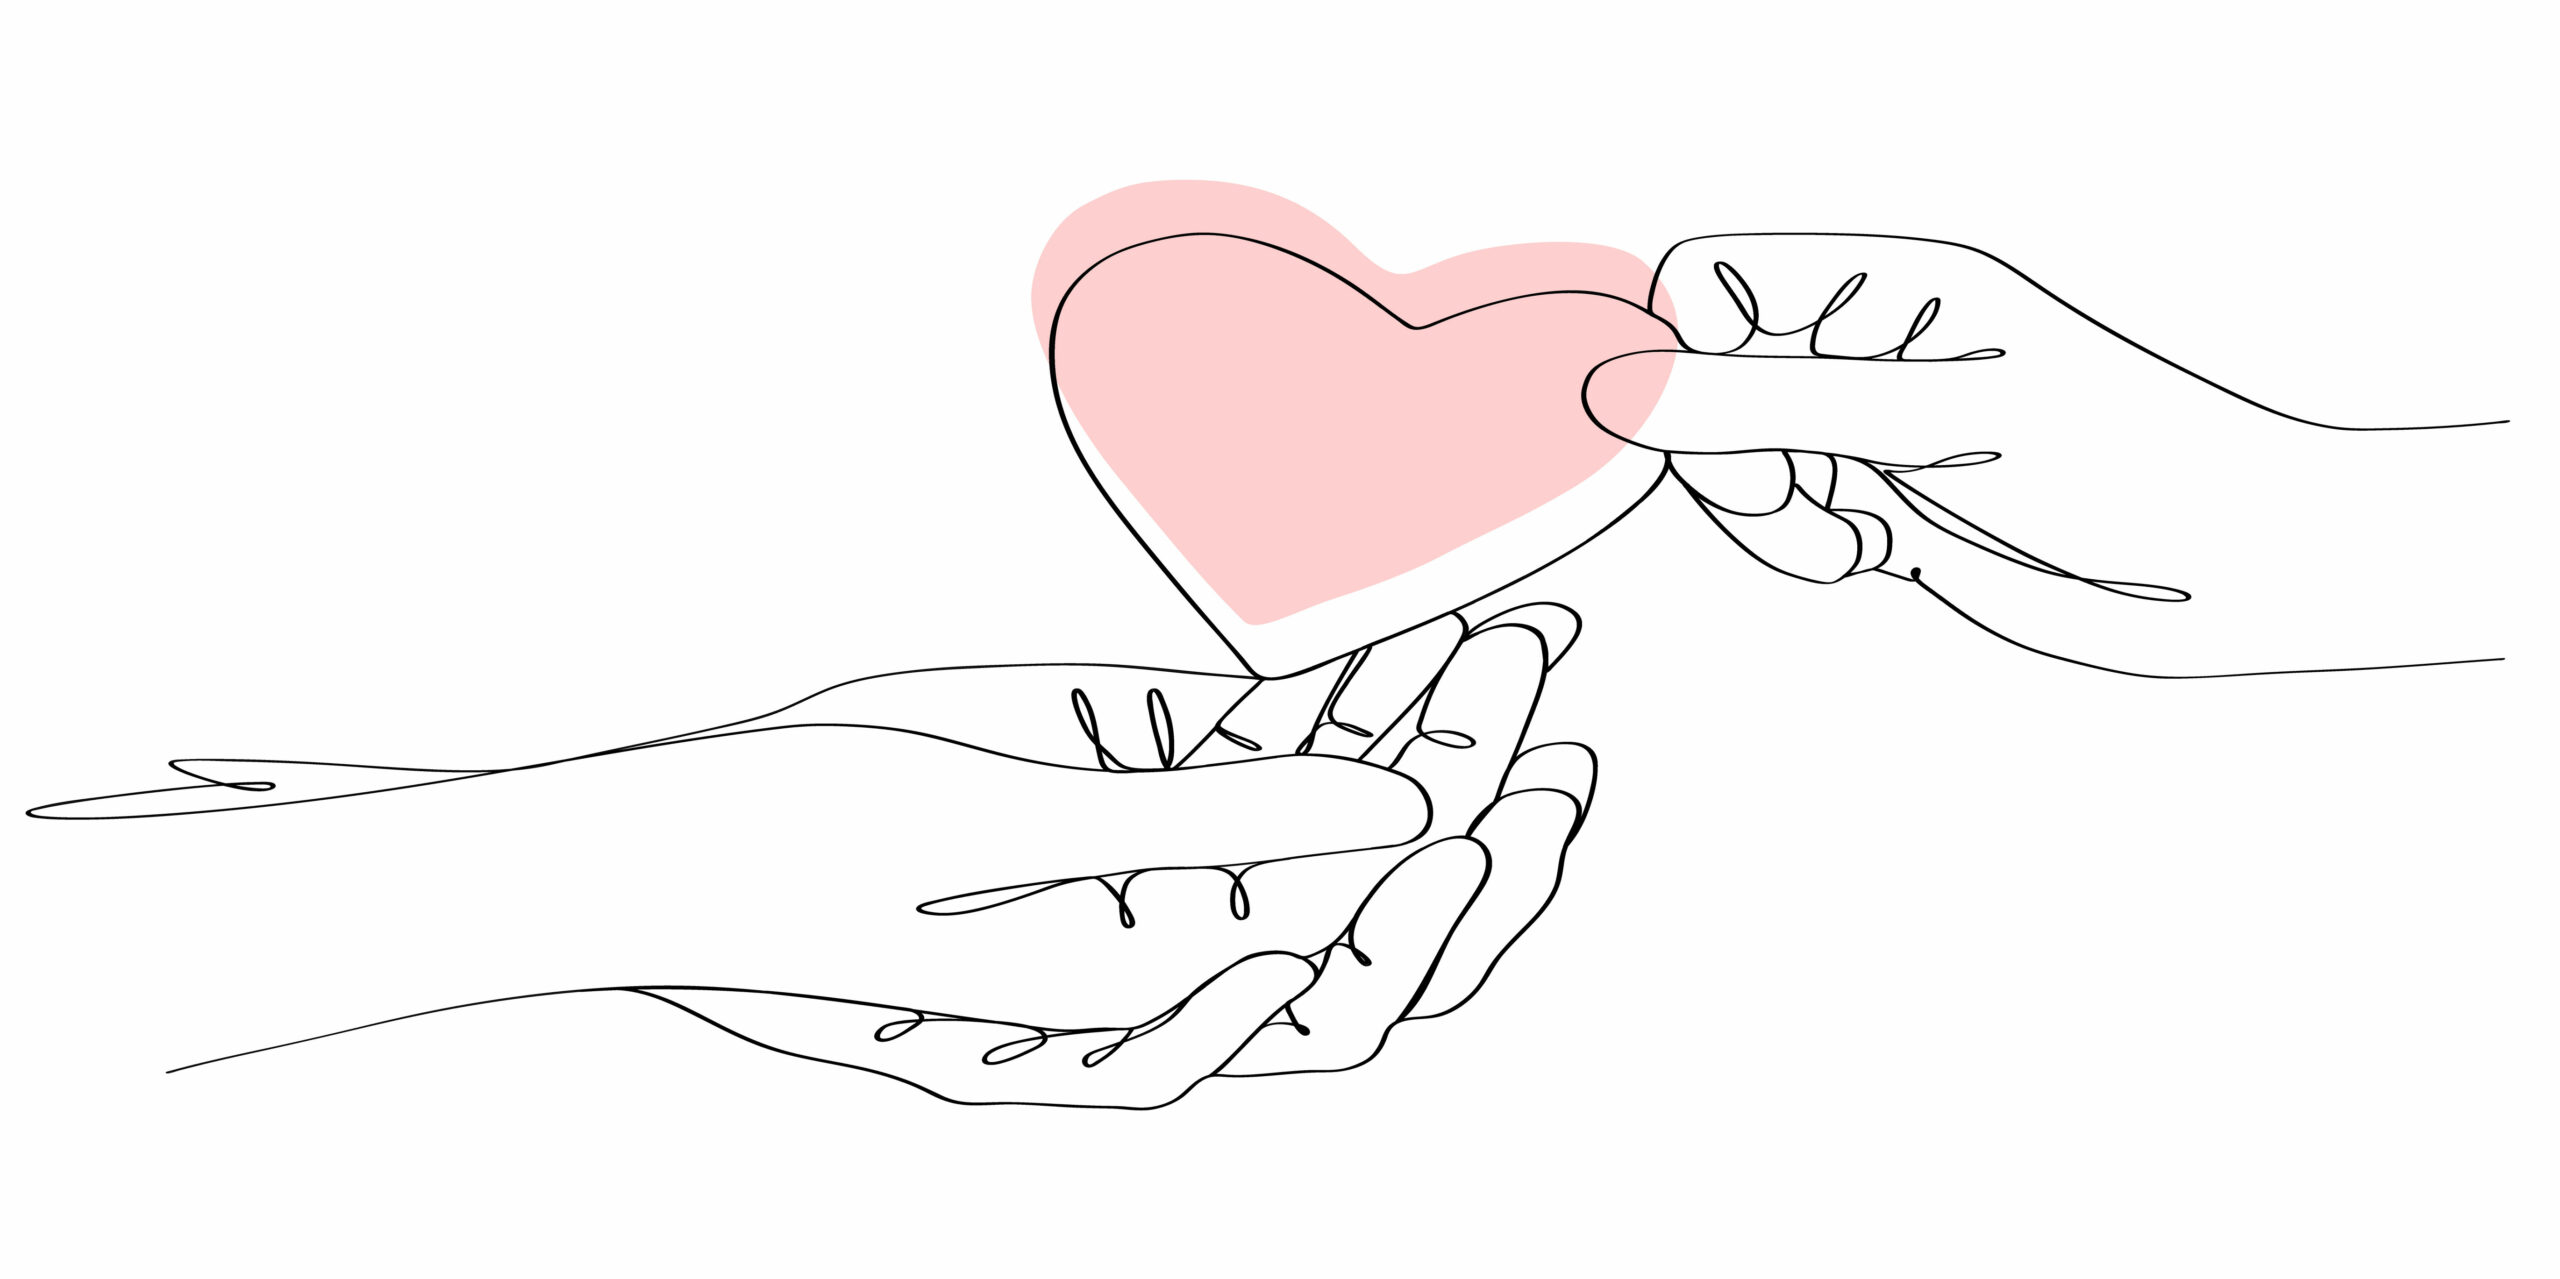 Support - a Hand give a heart to another hand